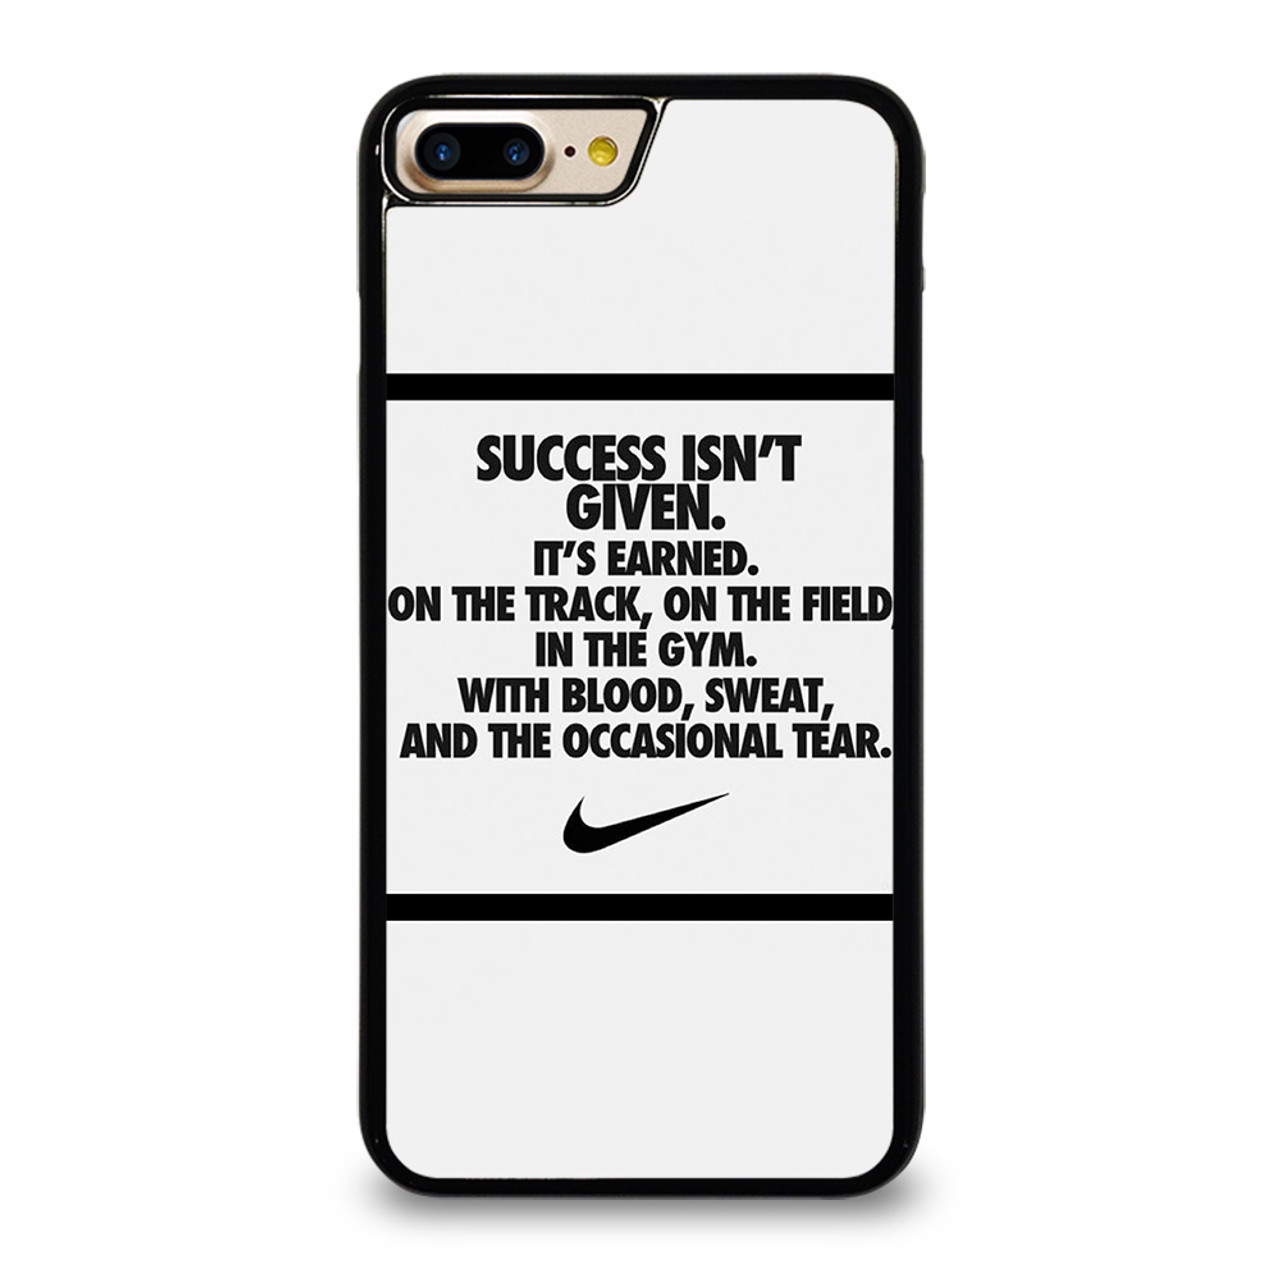 NIKE MOTIVATIONAL QUOTES iPhone 7 / 8 Plus Case Cover